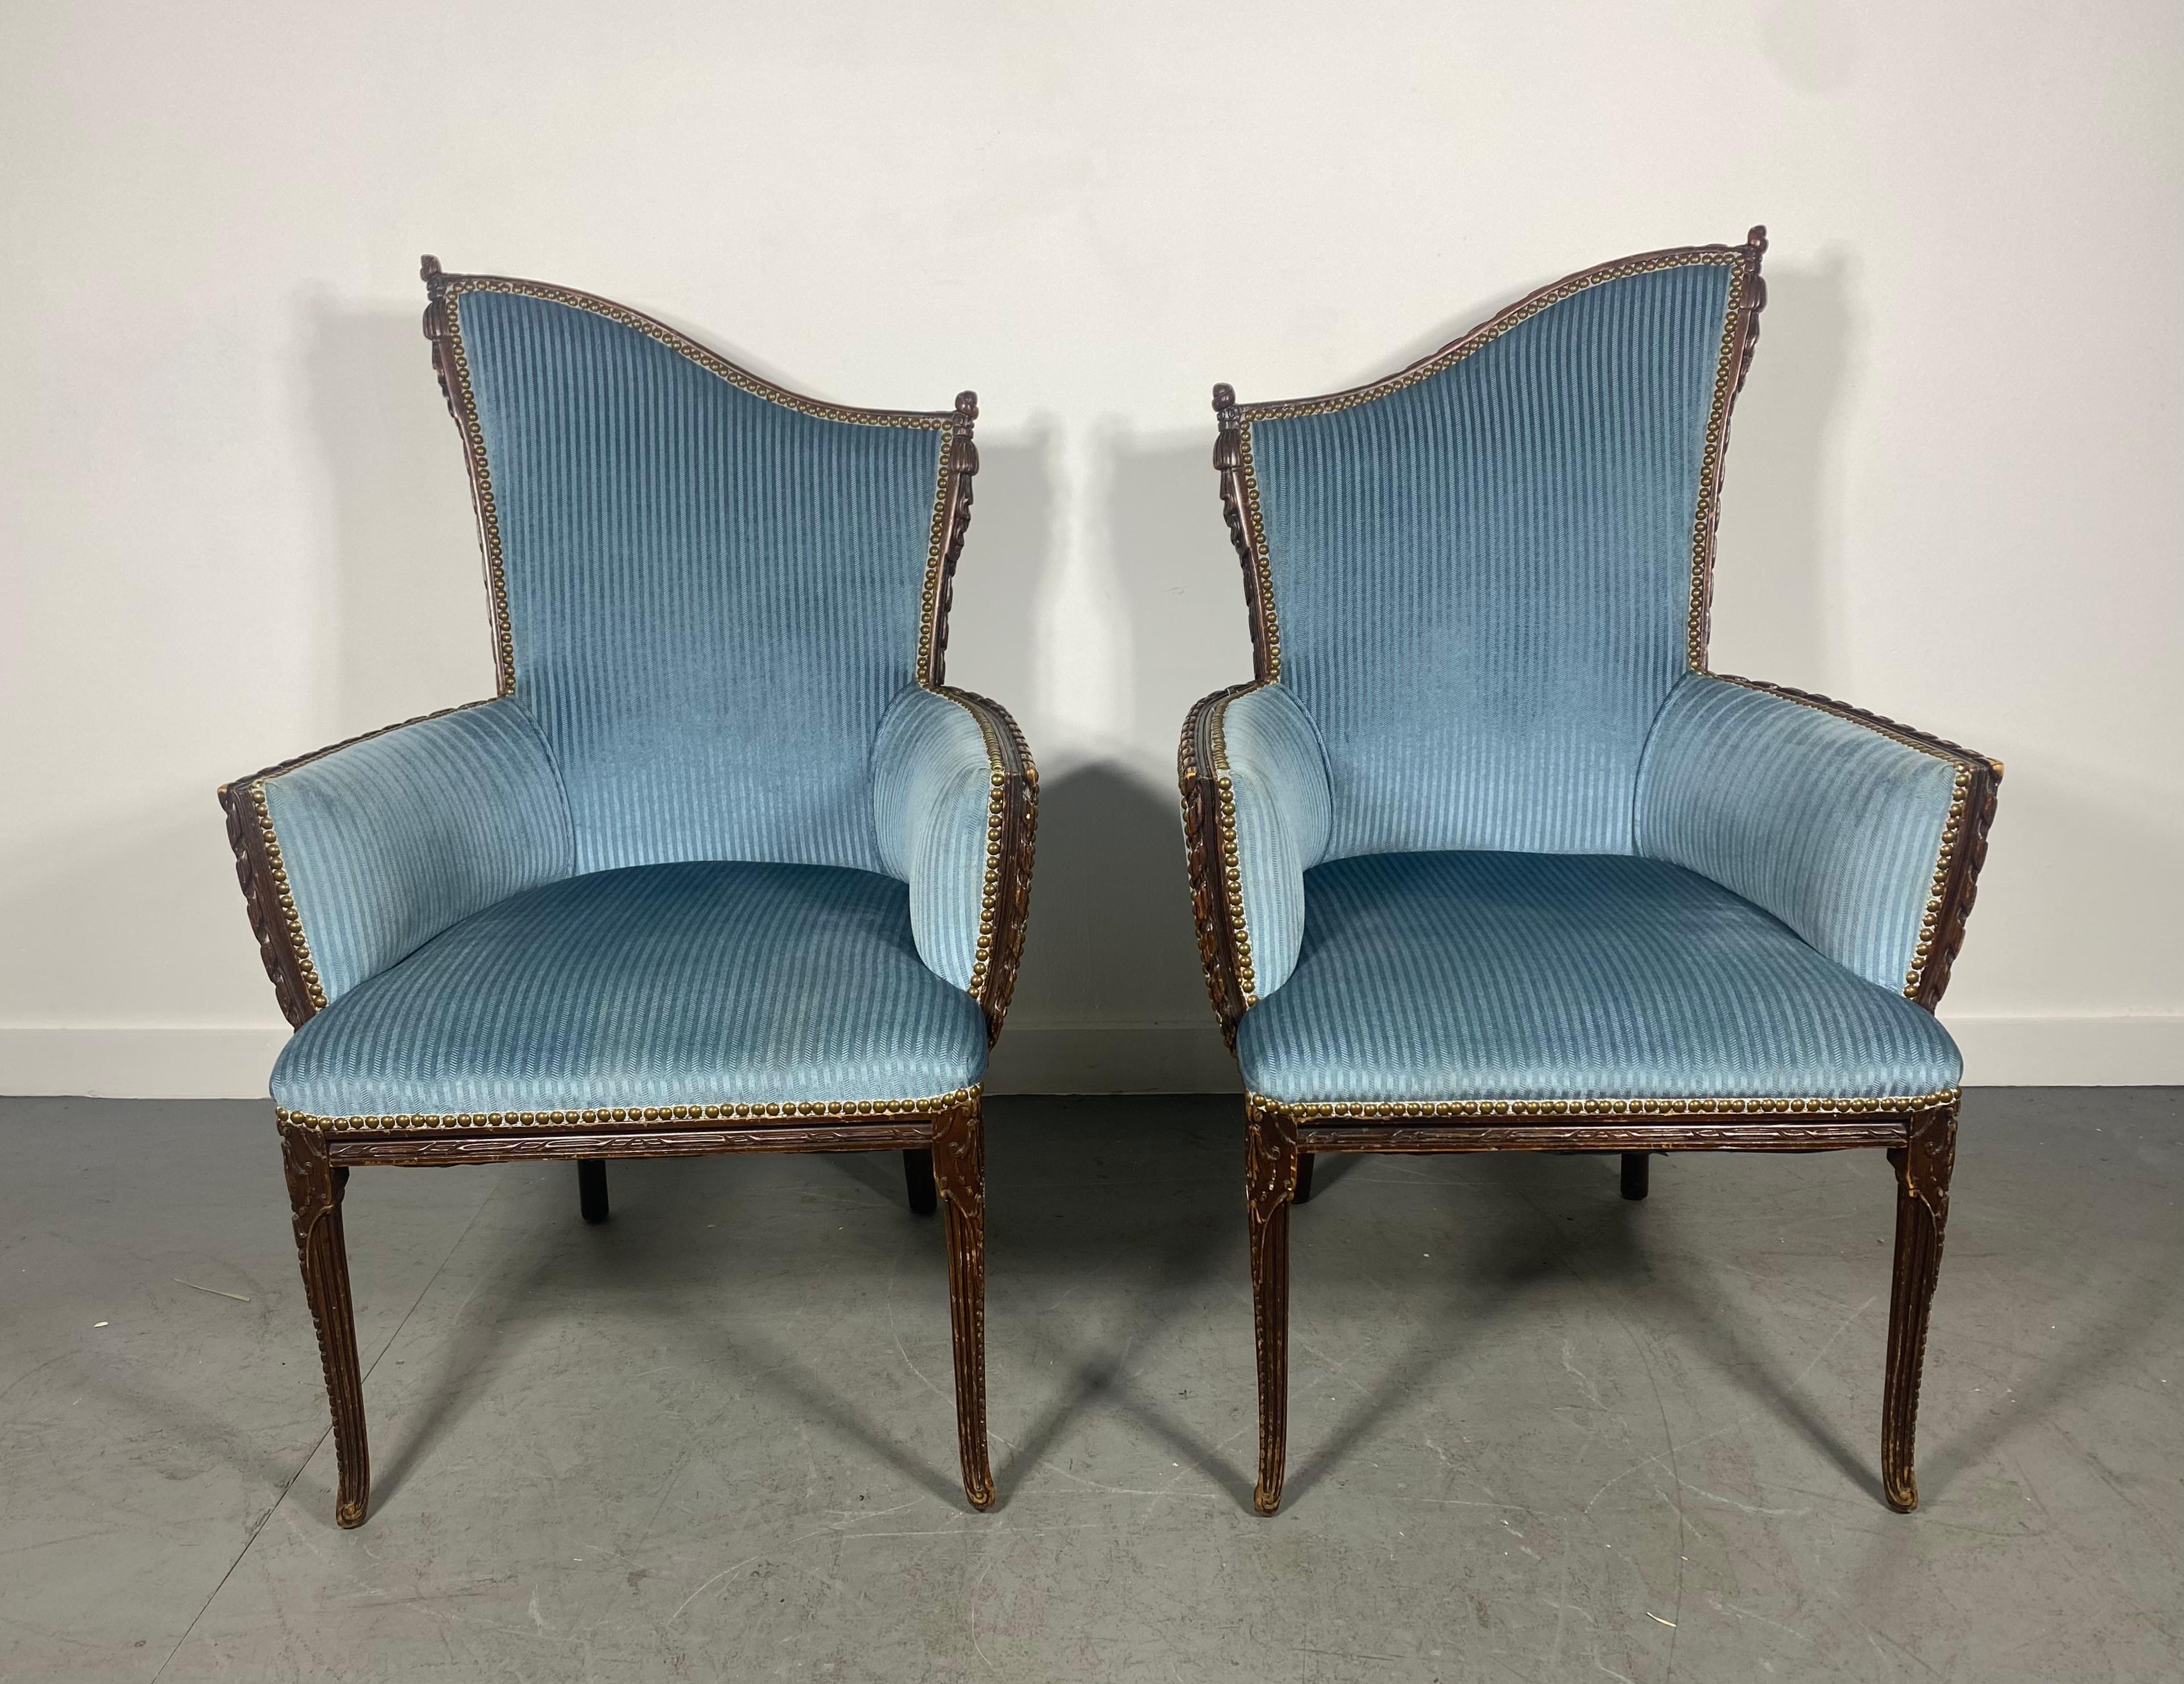 Mid-20th Century Stunning Pair Asymmetrical Regency Lounge Chairs by Grosfeld House For Sale